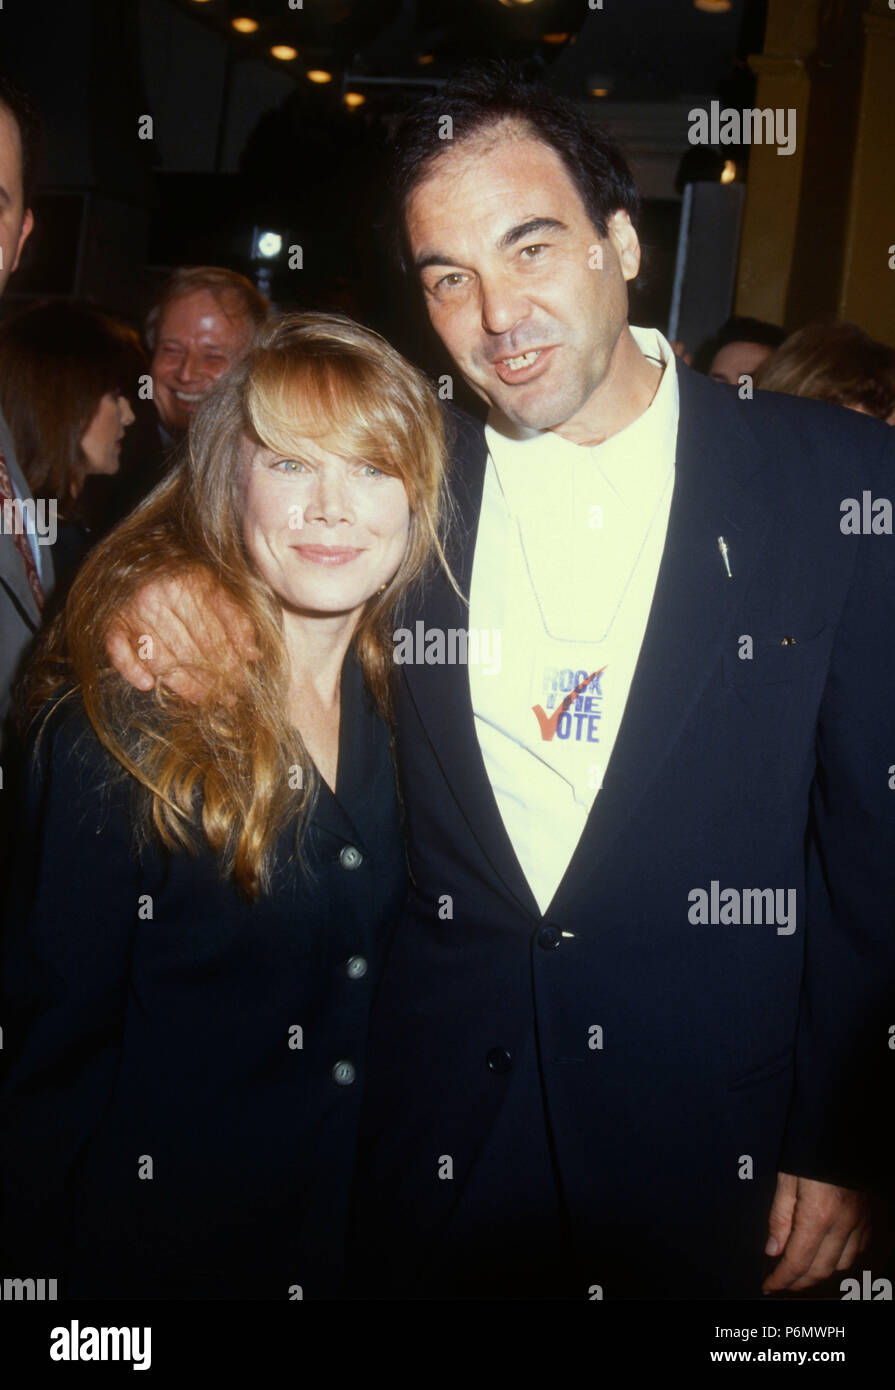 WESTWOOD, CA - DECEMBER 17: (L-R) Actress Sissy Spacek and director Oliver Stone attend the 'JFK' Westwood Premiere on December 17, 1991 at Mann Village Theatre in Westwood, California. Photo by Barry King/Alamy Stock Photo Stock Photo